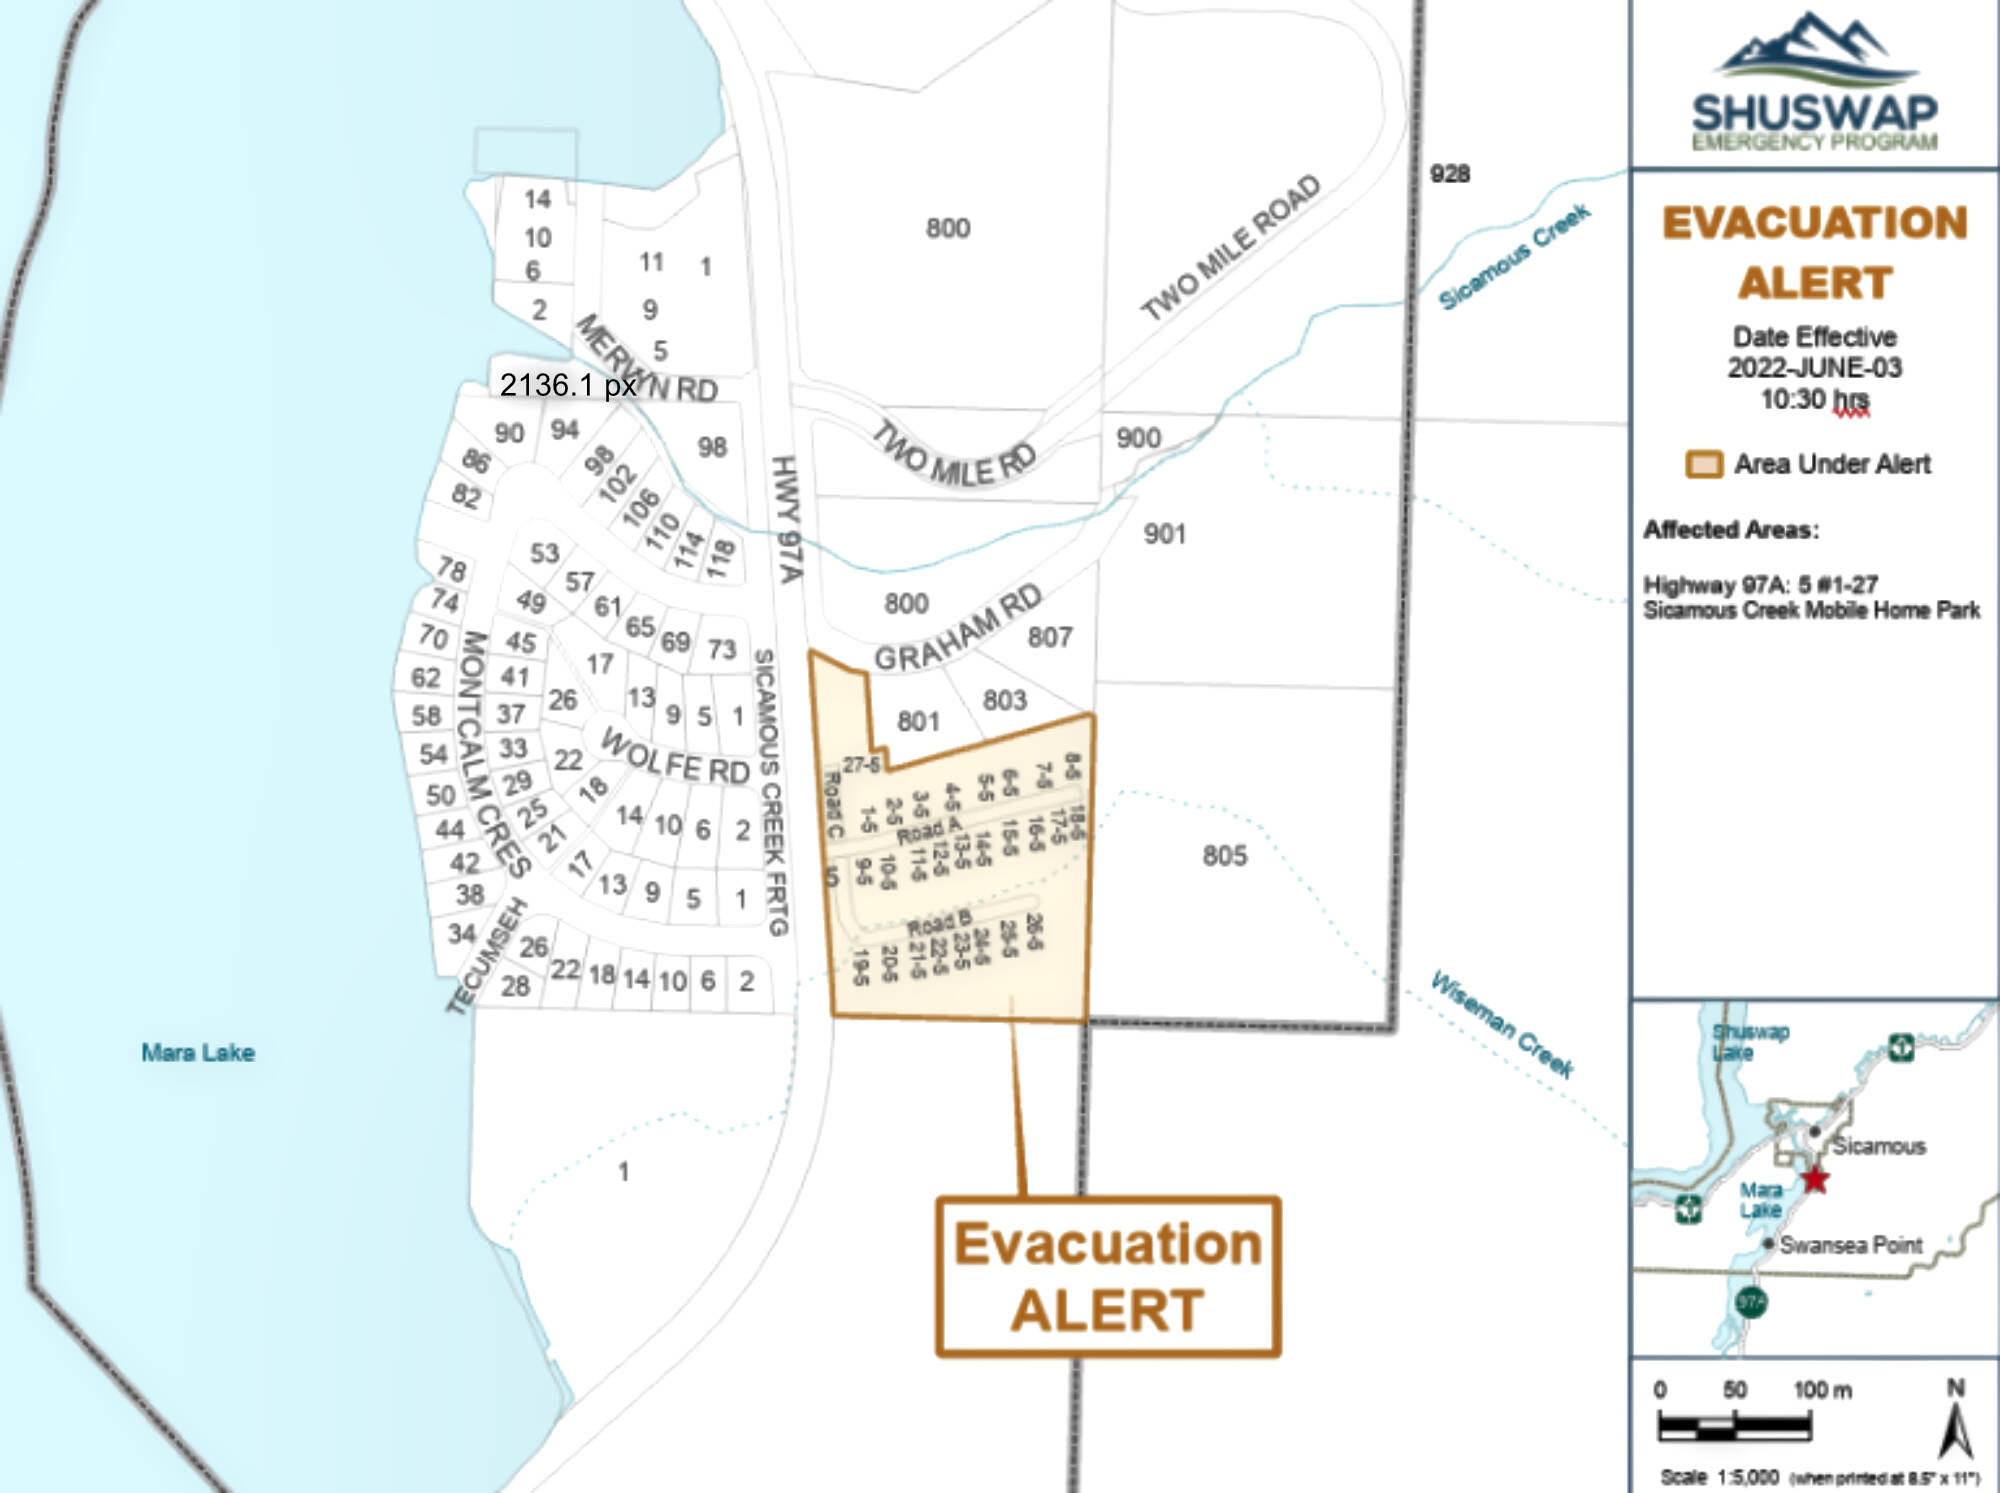 An evacuation alert was issued for residences in the Sicamous Mobile Home Park on Friday, June 3, 2022. (CSRD image)